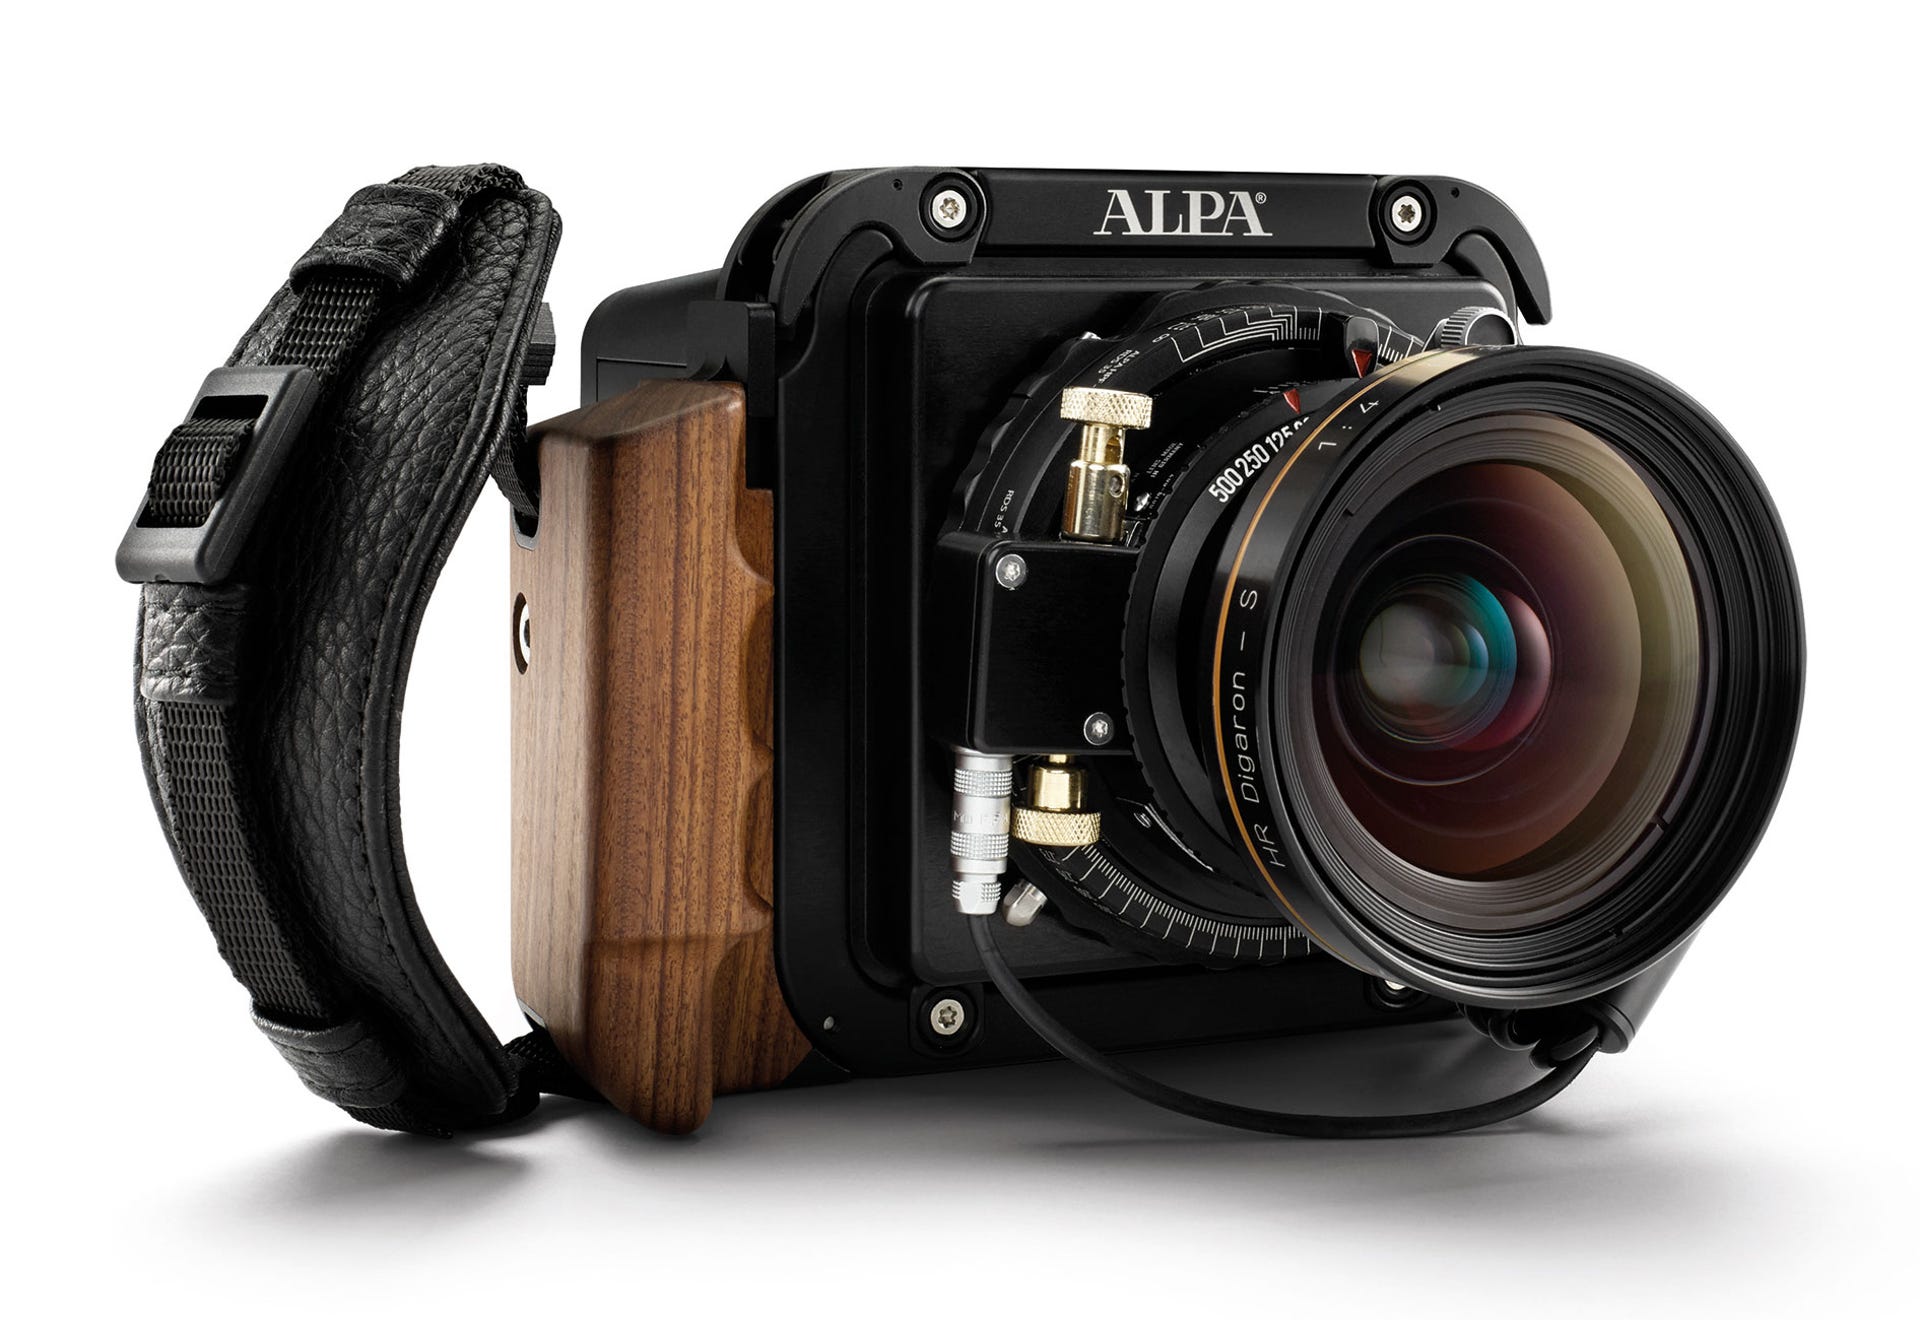 The A-series from Phase One and Alpa comes with a rosewood grip and leather strap for handheld use. On-the-go photographers will have to set focus and metering manually, though.